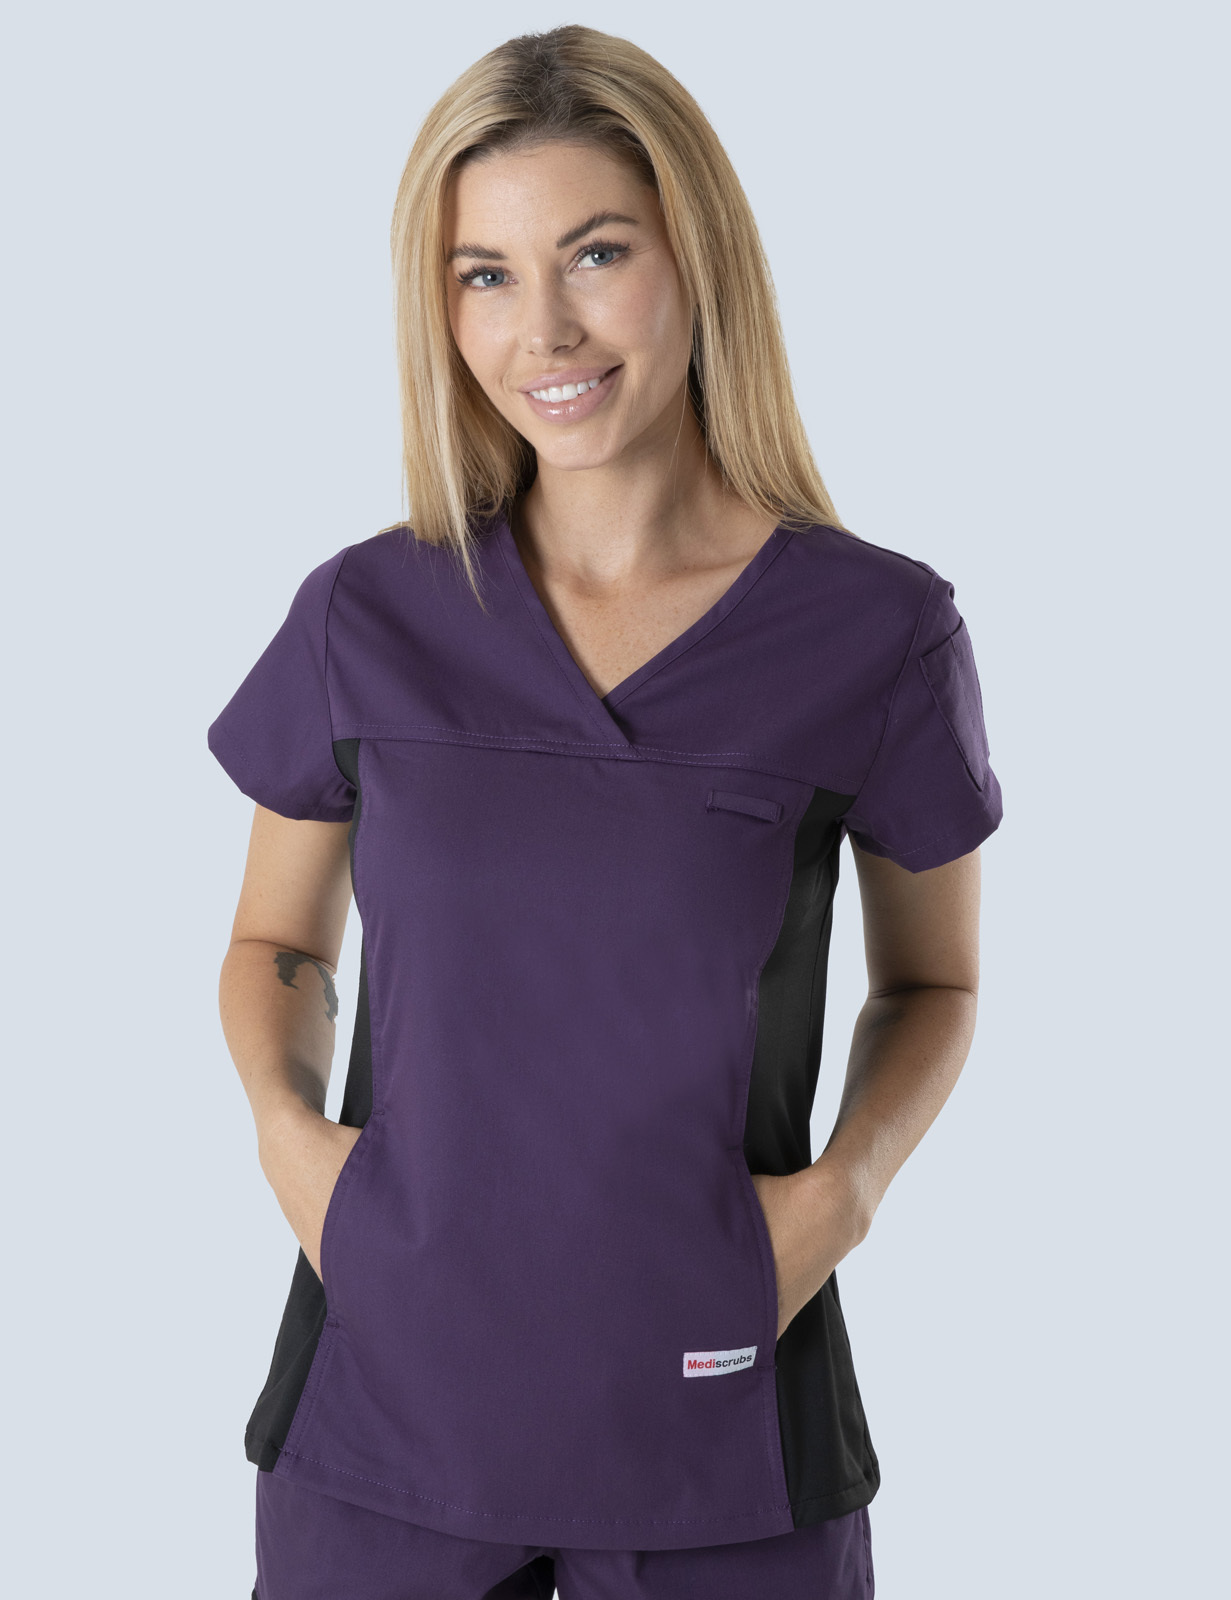 Ipswich Hospital HITH Uniform Top Only Bundle ( Women's Fit Spandex Top in Aubergine incl Logos)